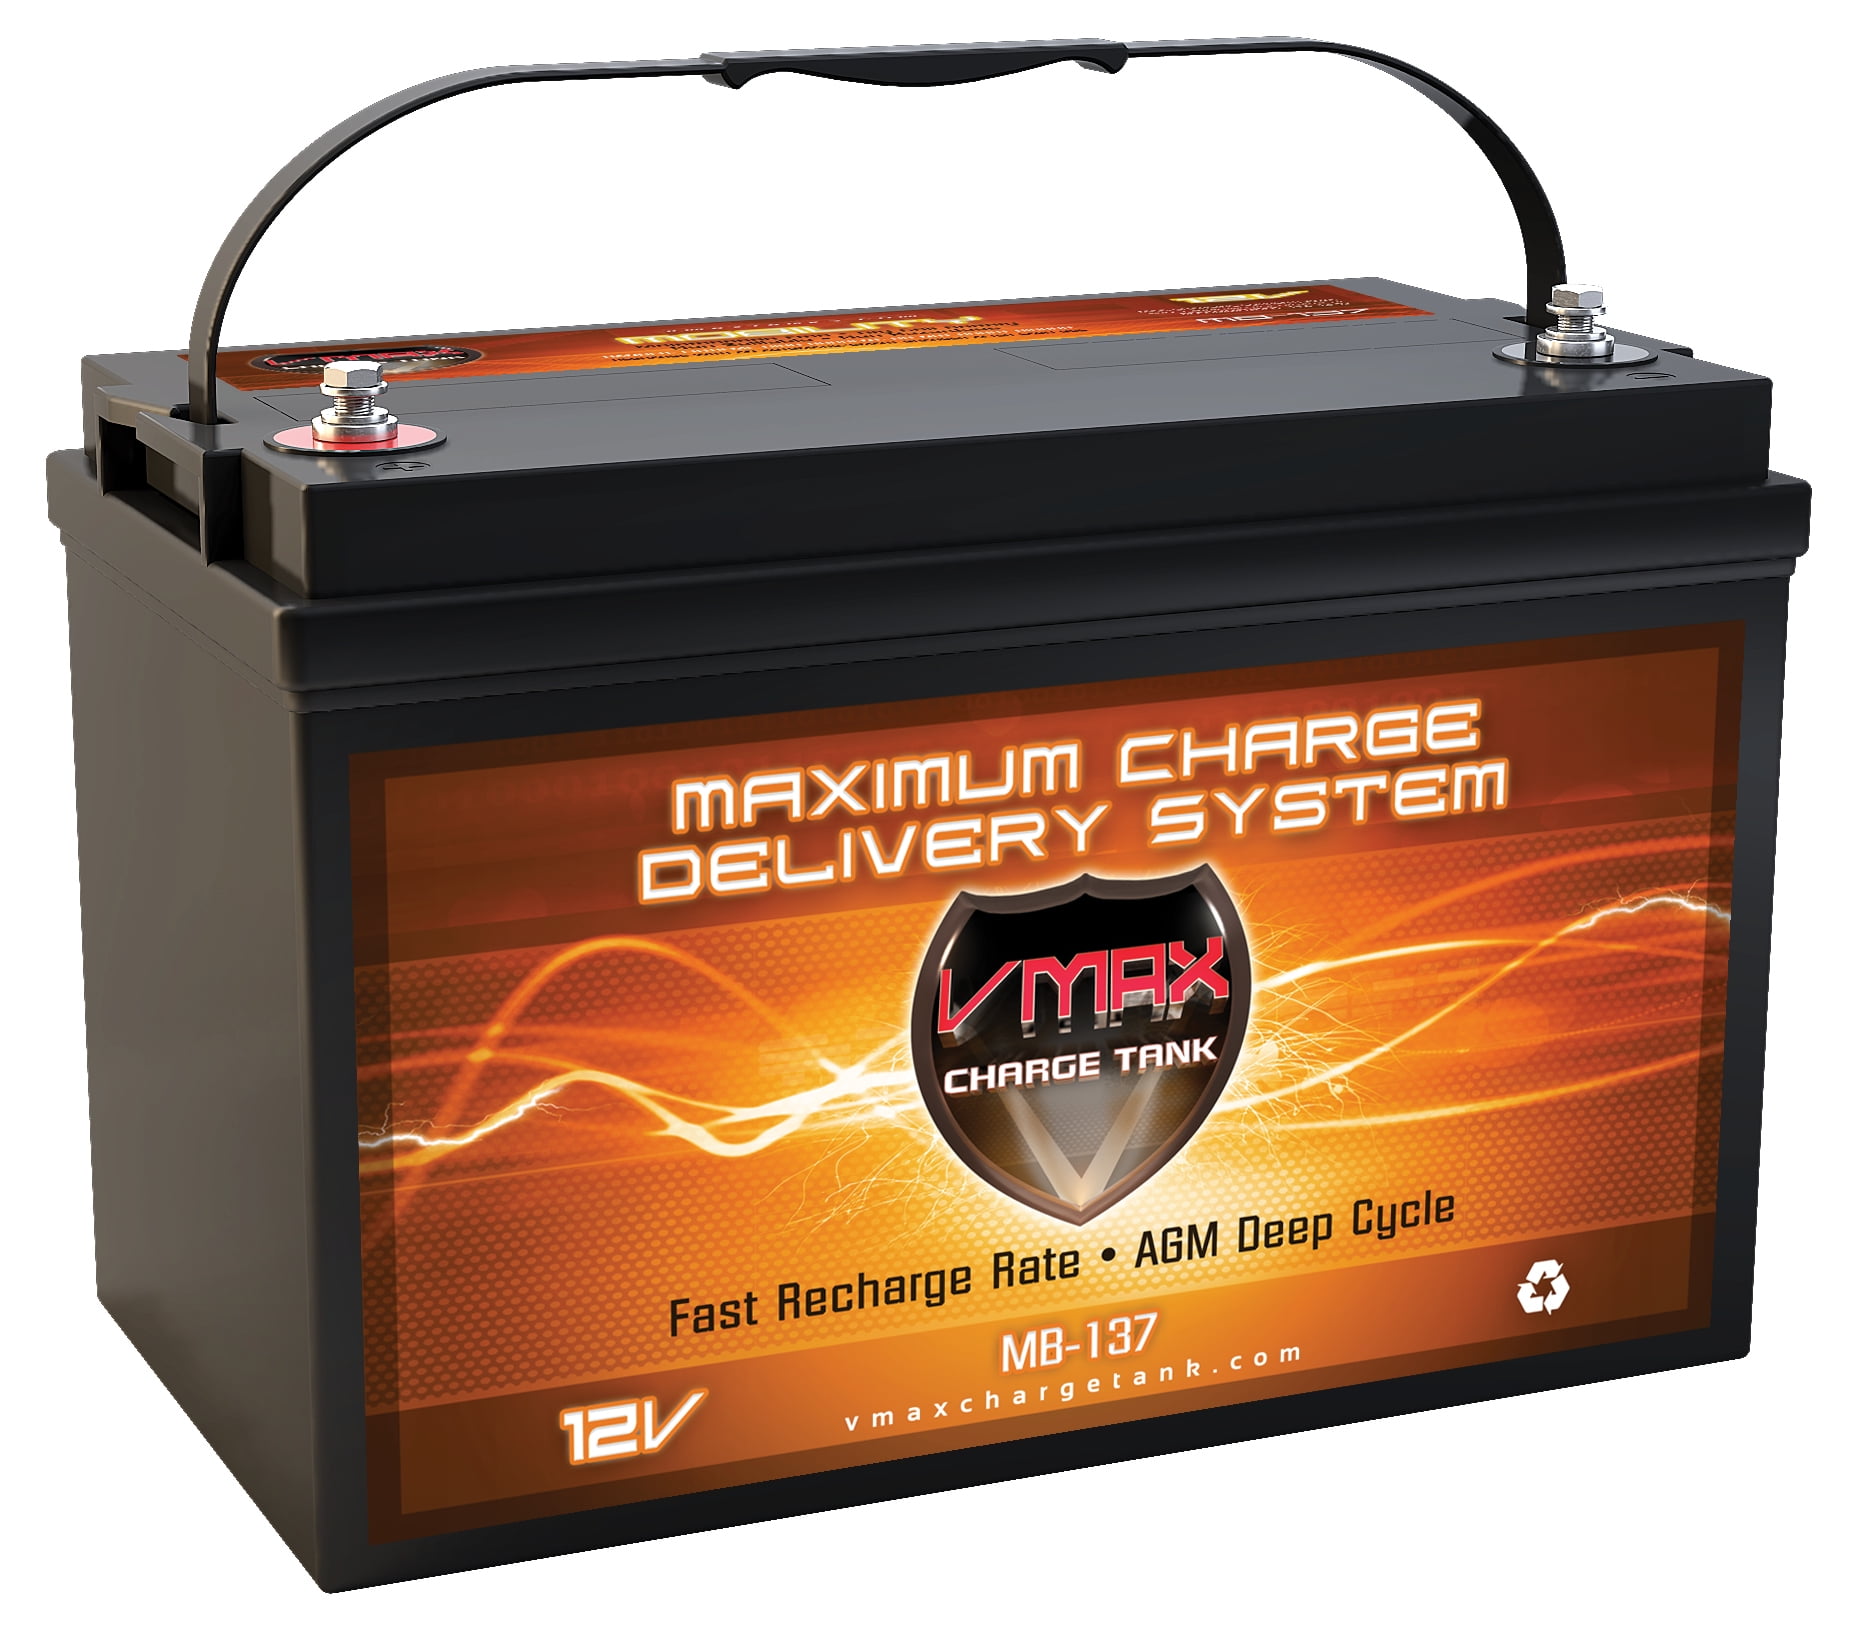 VMAX MB137-120 AGM Group 31 Deep Cycle Battery Replaces Interstate 31-XHD  12V 120Ah 